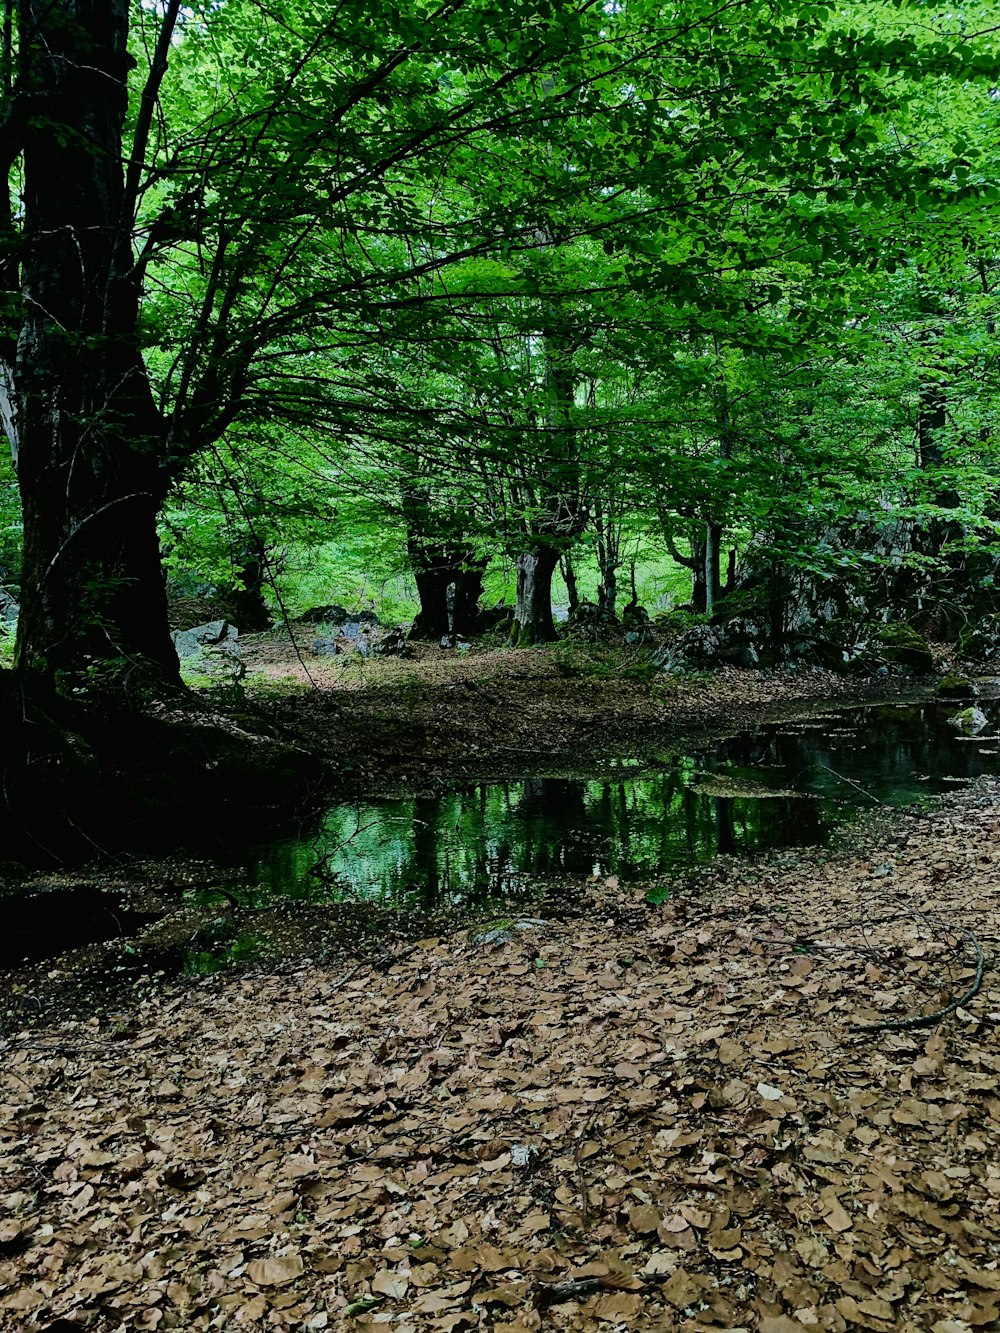 a small stream running through a forest filled with leaves